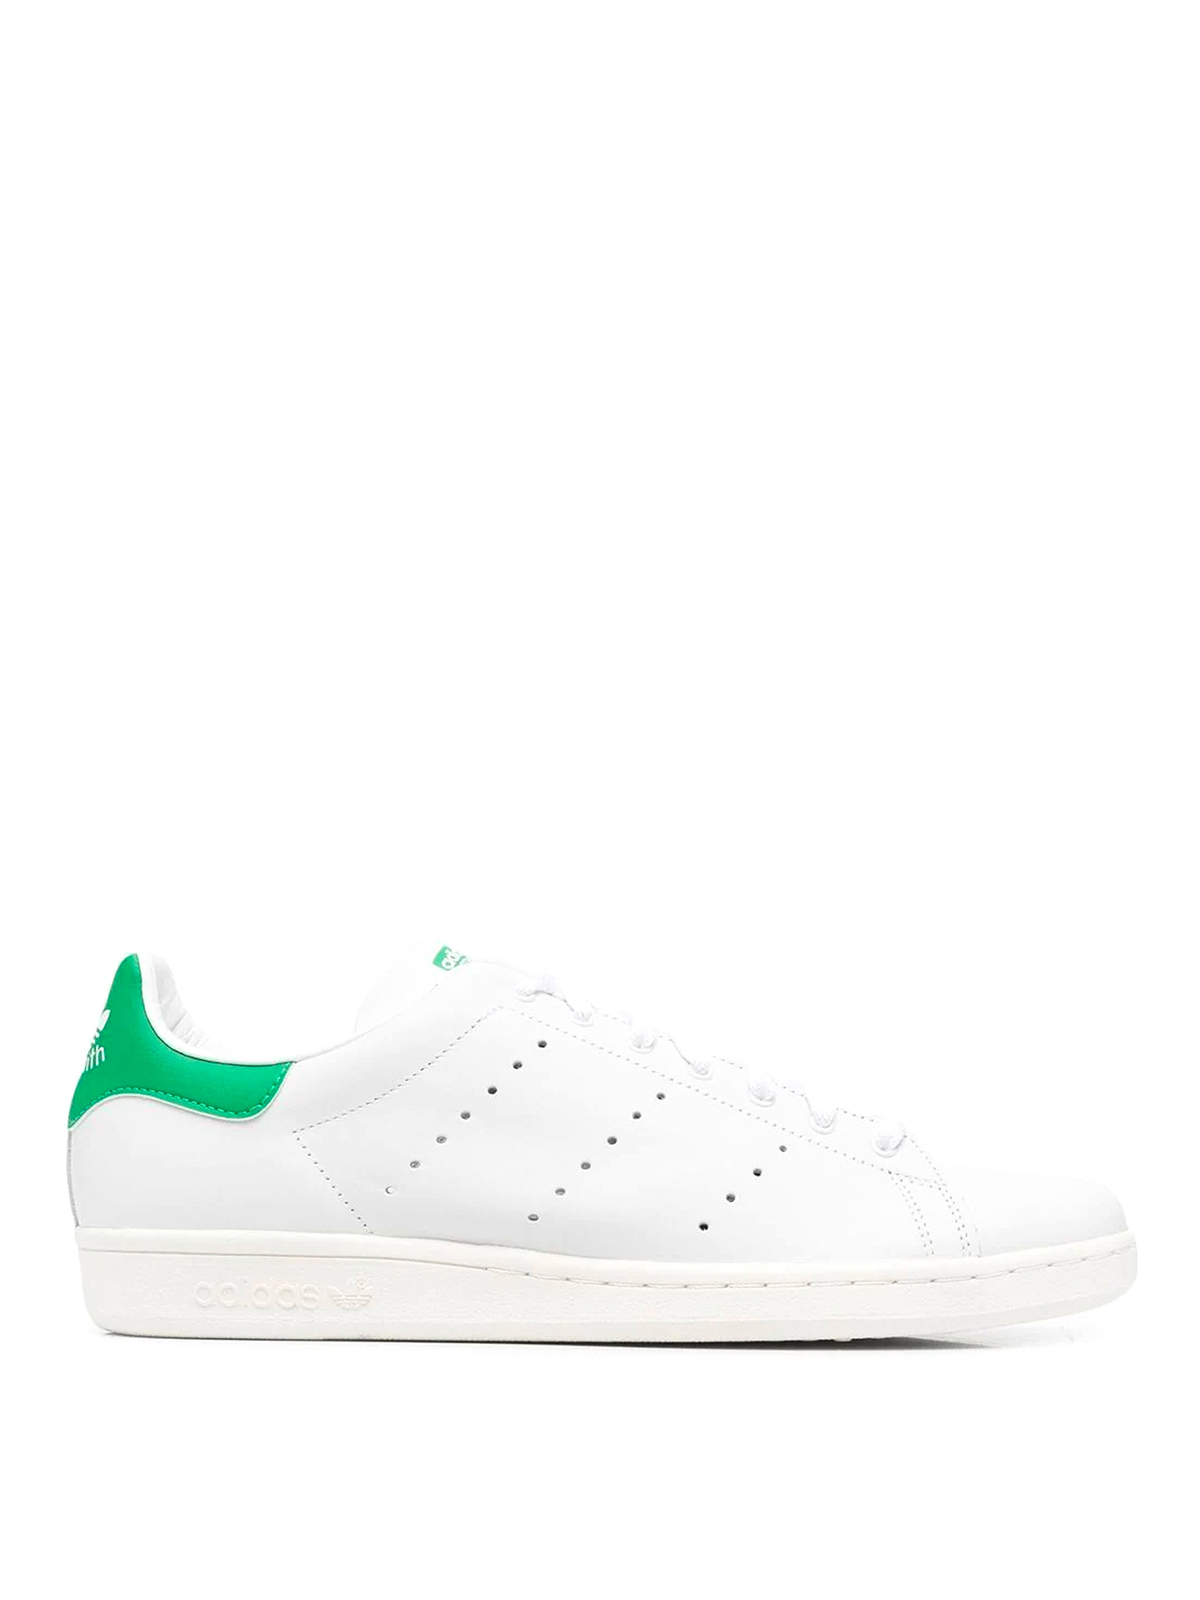 Shop Adidas Originals Stan Smith 80s Sneakers In White